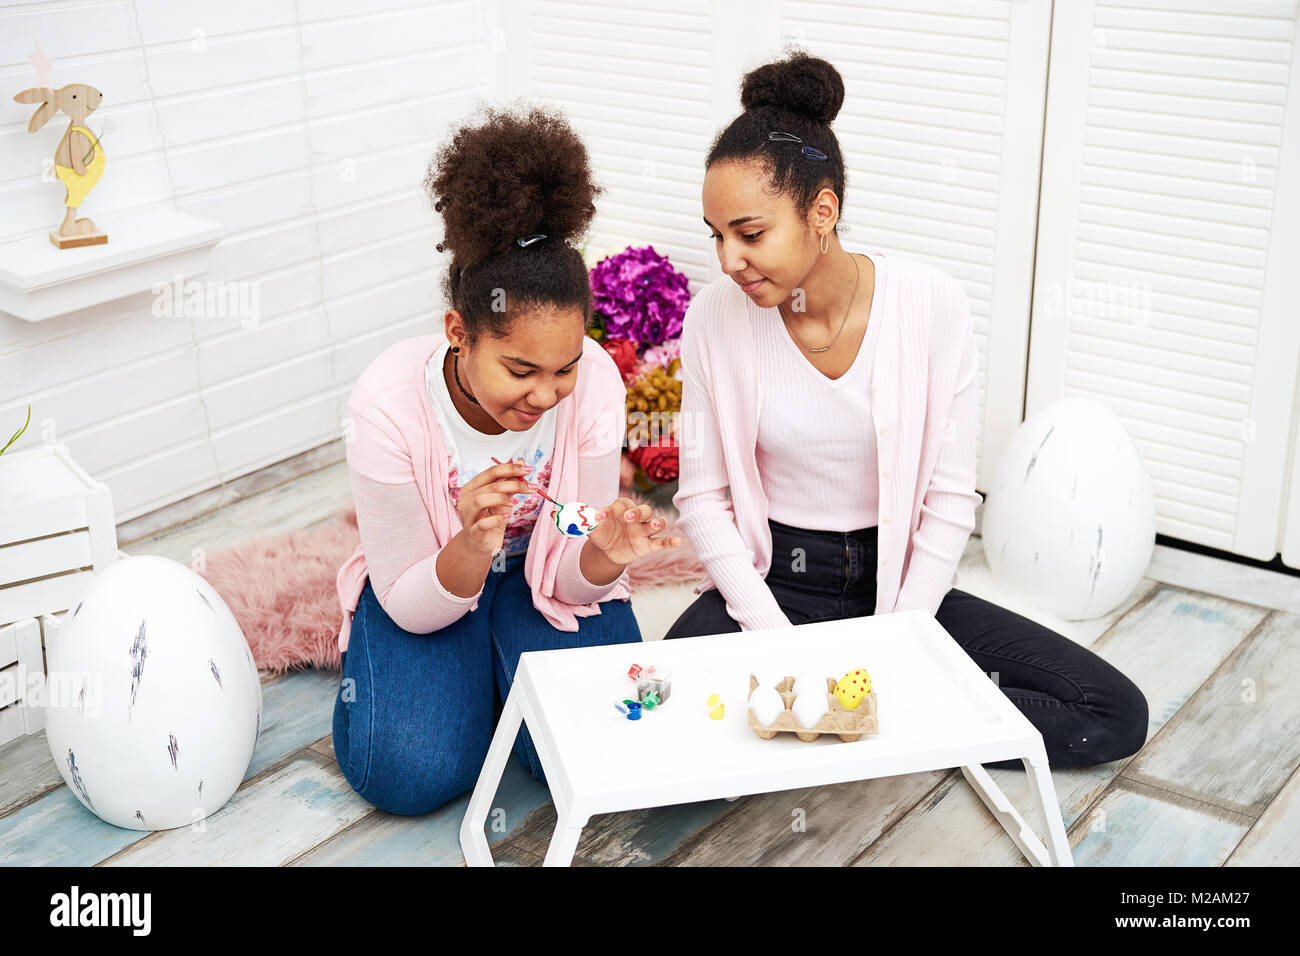 Two girls with black skin paining eggs Stock Photo